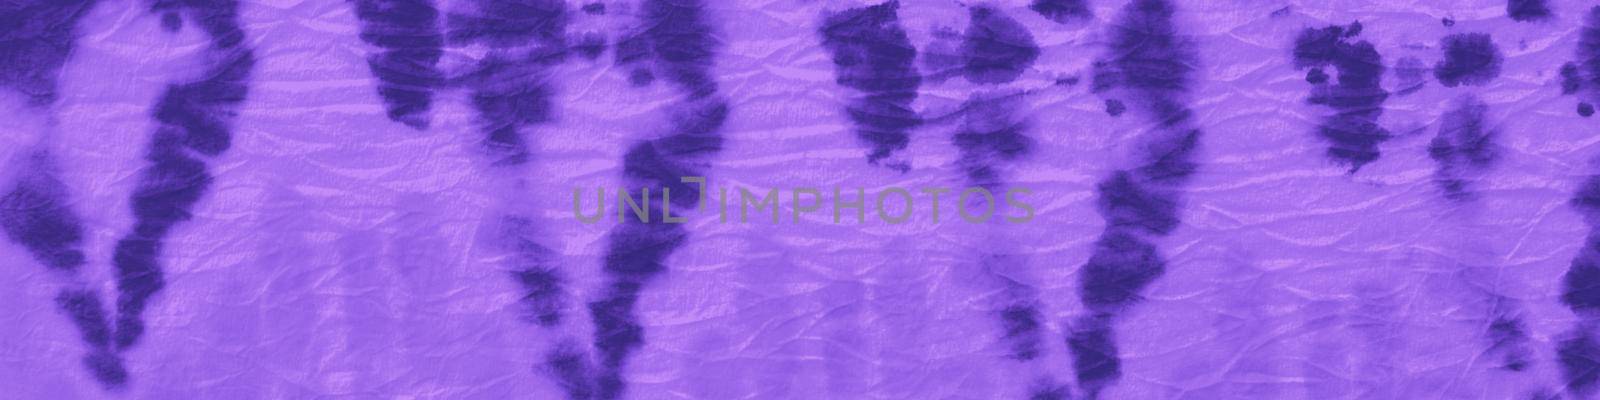 Purple Lilac Ikat Design. Tie Dye Background. Abstract Aquarelle Painting. Dirty Art Drawing. Ikat Chevron. Tie Dye Shibori. Abstract Aquarel Paint Stains. Purple Lilac Crumpled Texture.